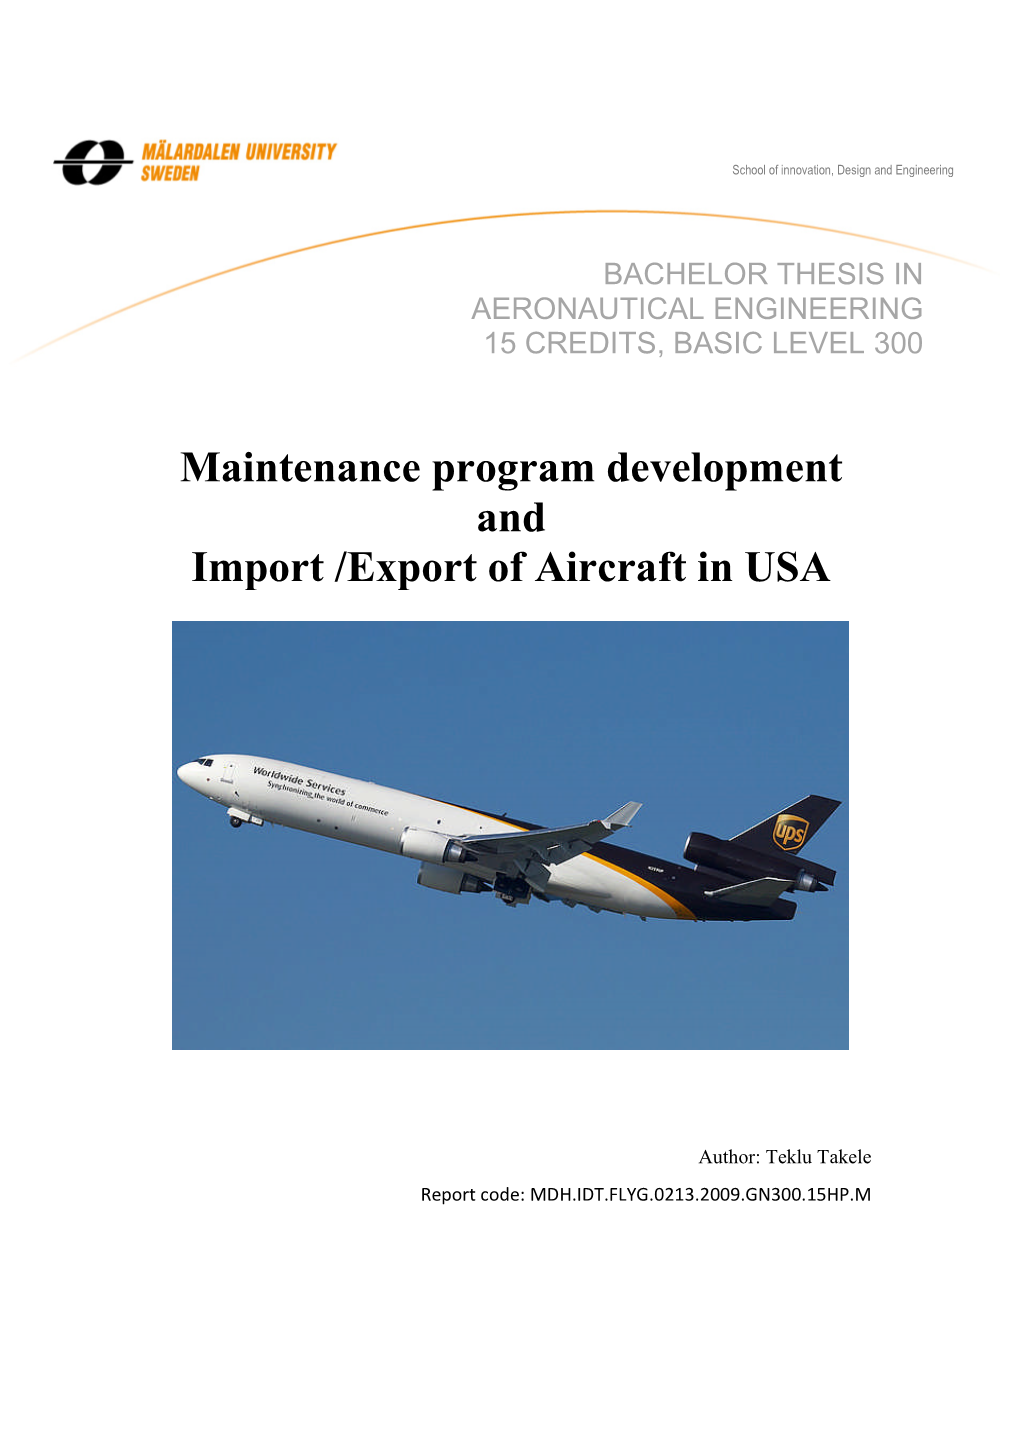 Maintenance Program Development and Import /Export of Aircraft in USA